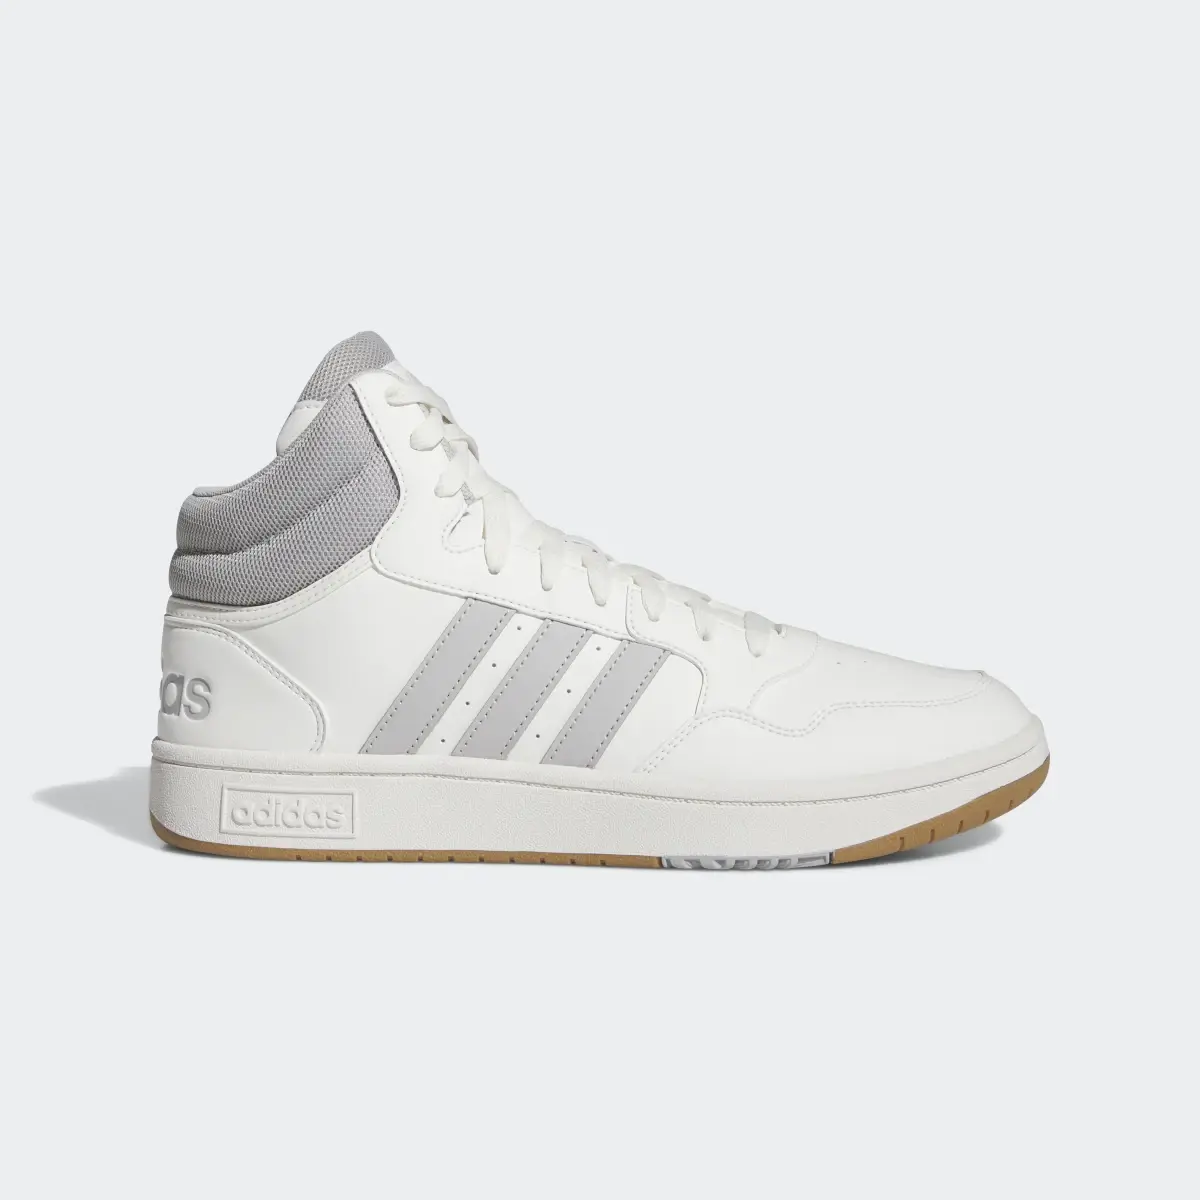 Adidas Hoops 3.0 Mid Classic Vintage Shoes. 2